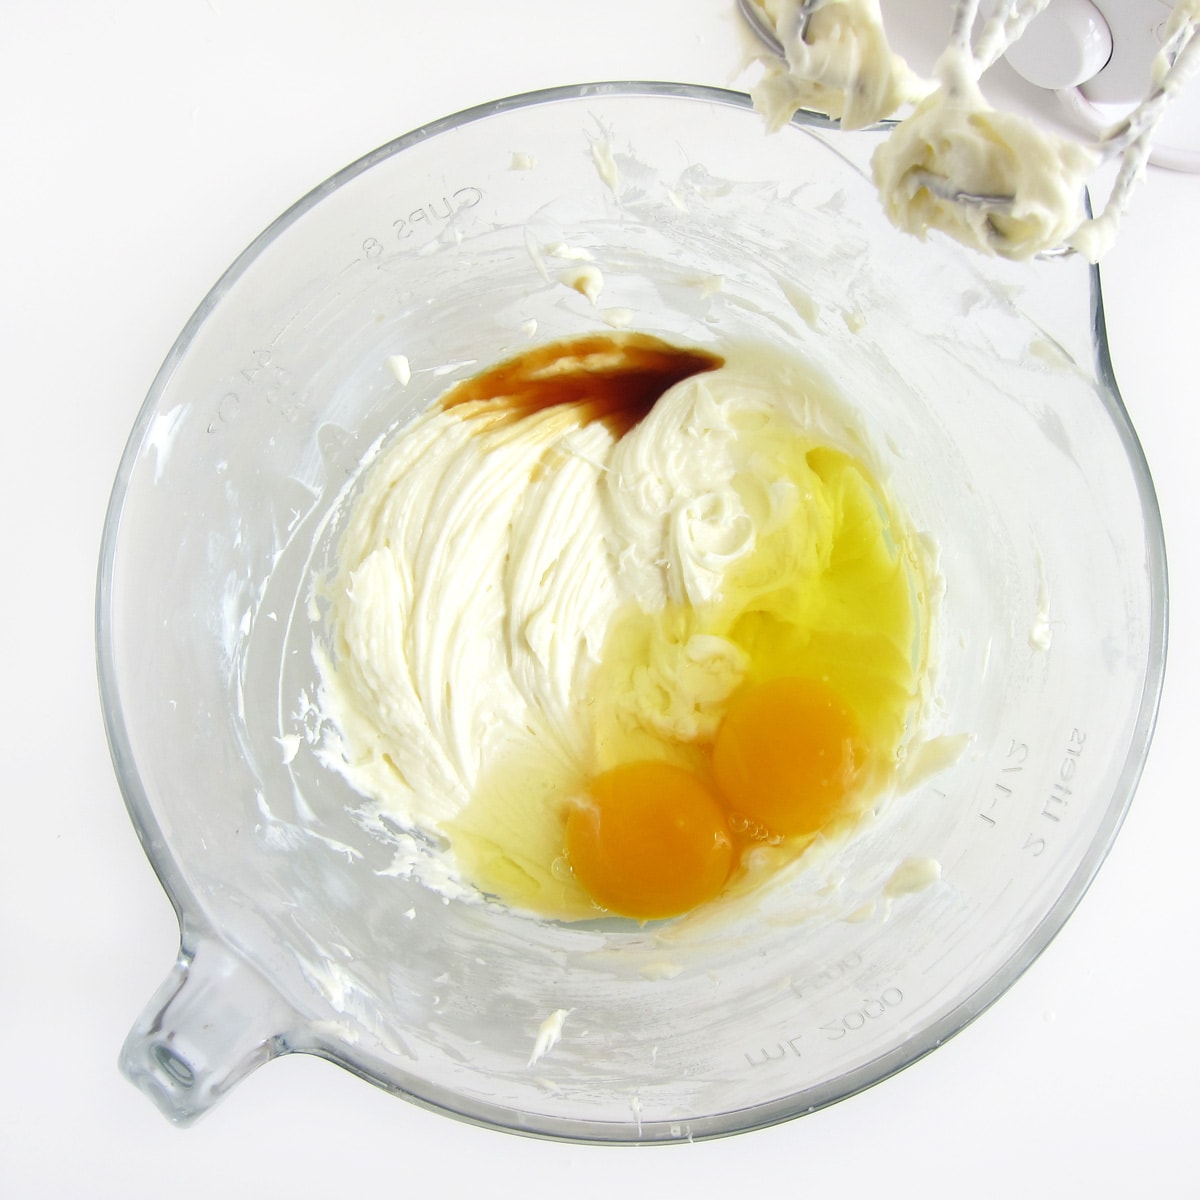 Eggs and vanilla added to creamed sugar and cream cheese in mixing bowl.